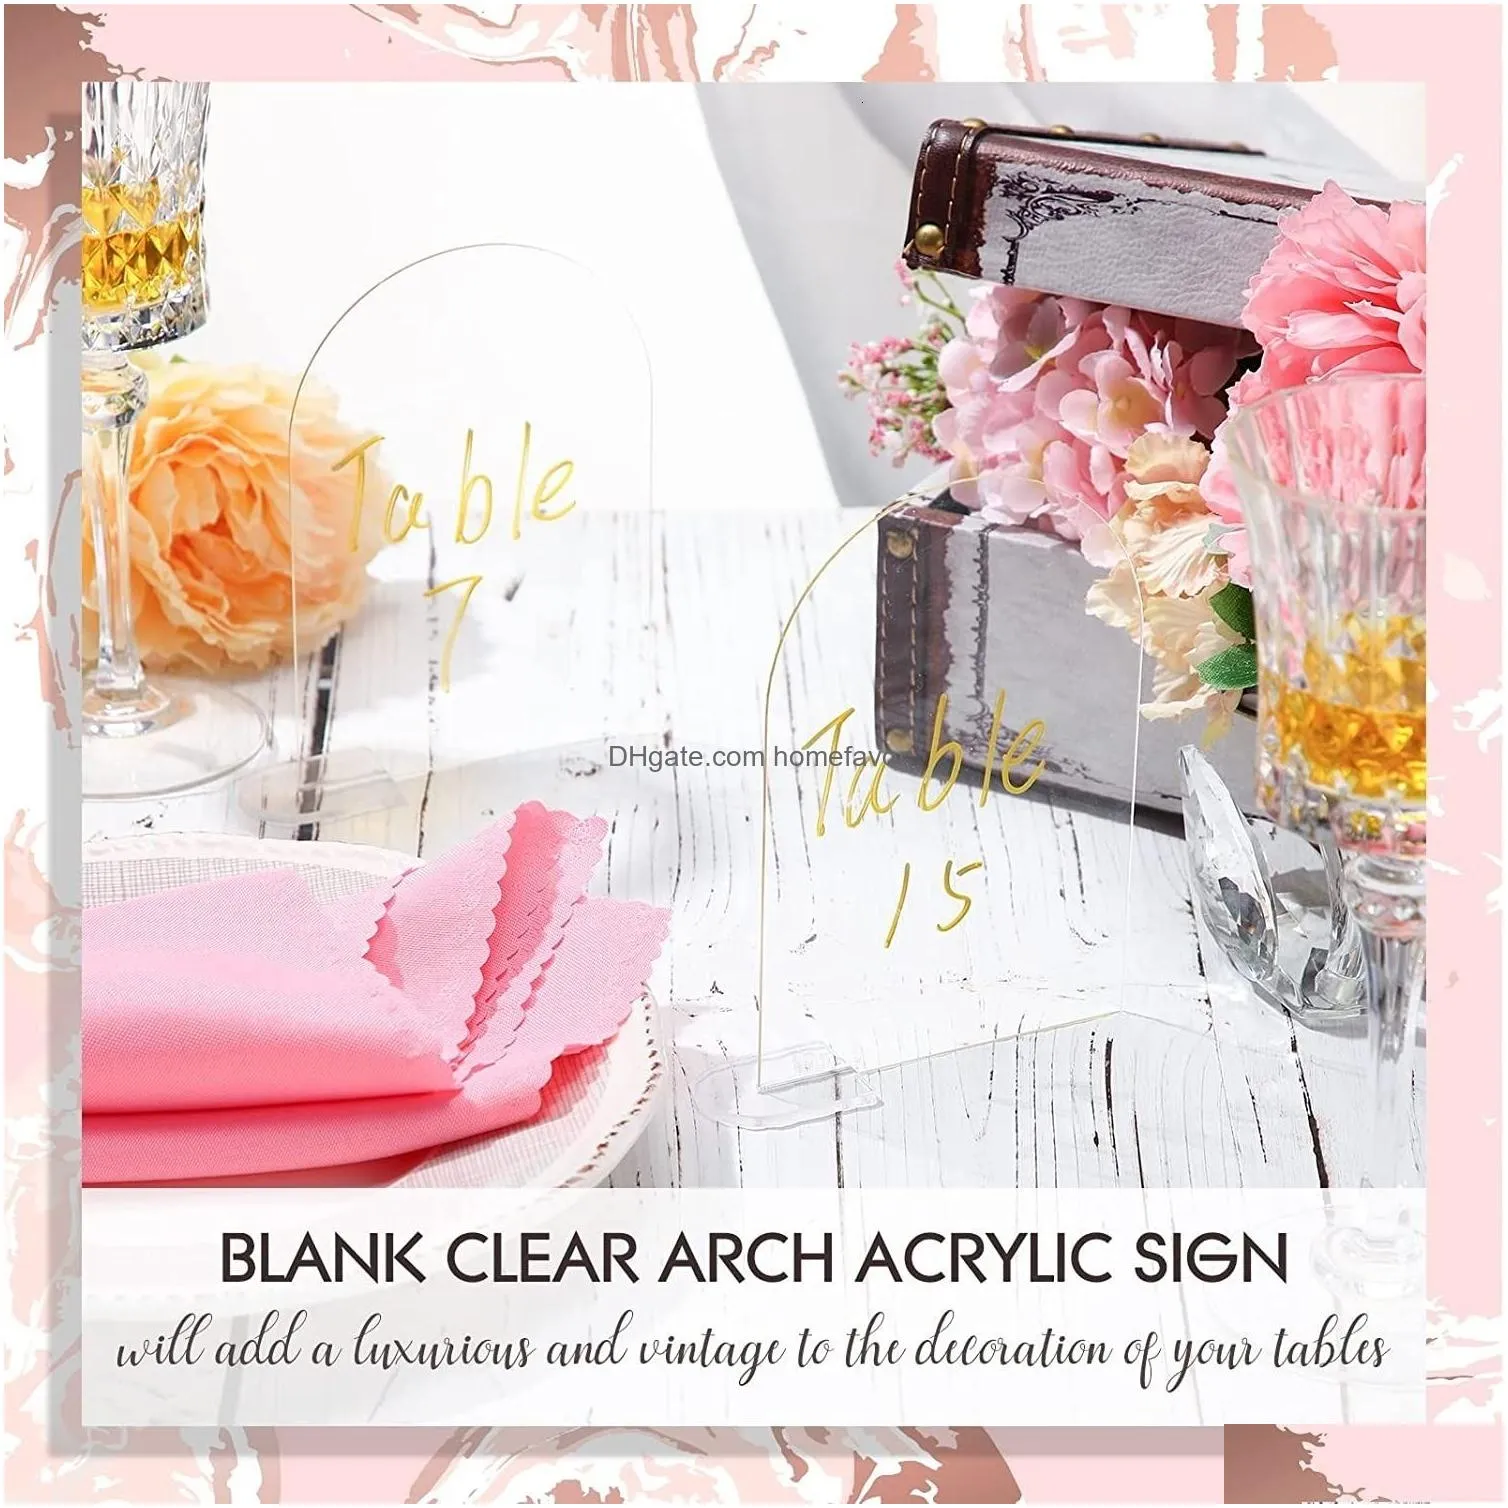 other event party supplies clear arch acrylic sign with stand blank arched acrylic sheet with base for wedding table number card menu sign bar list sign